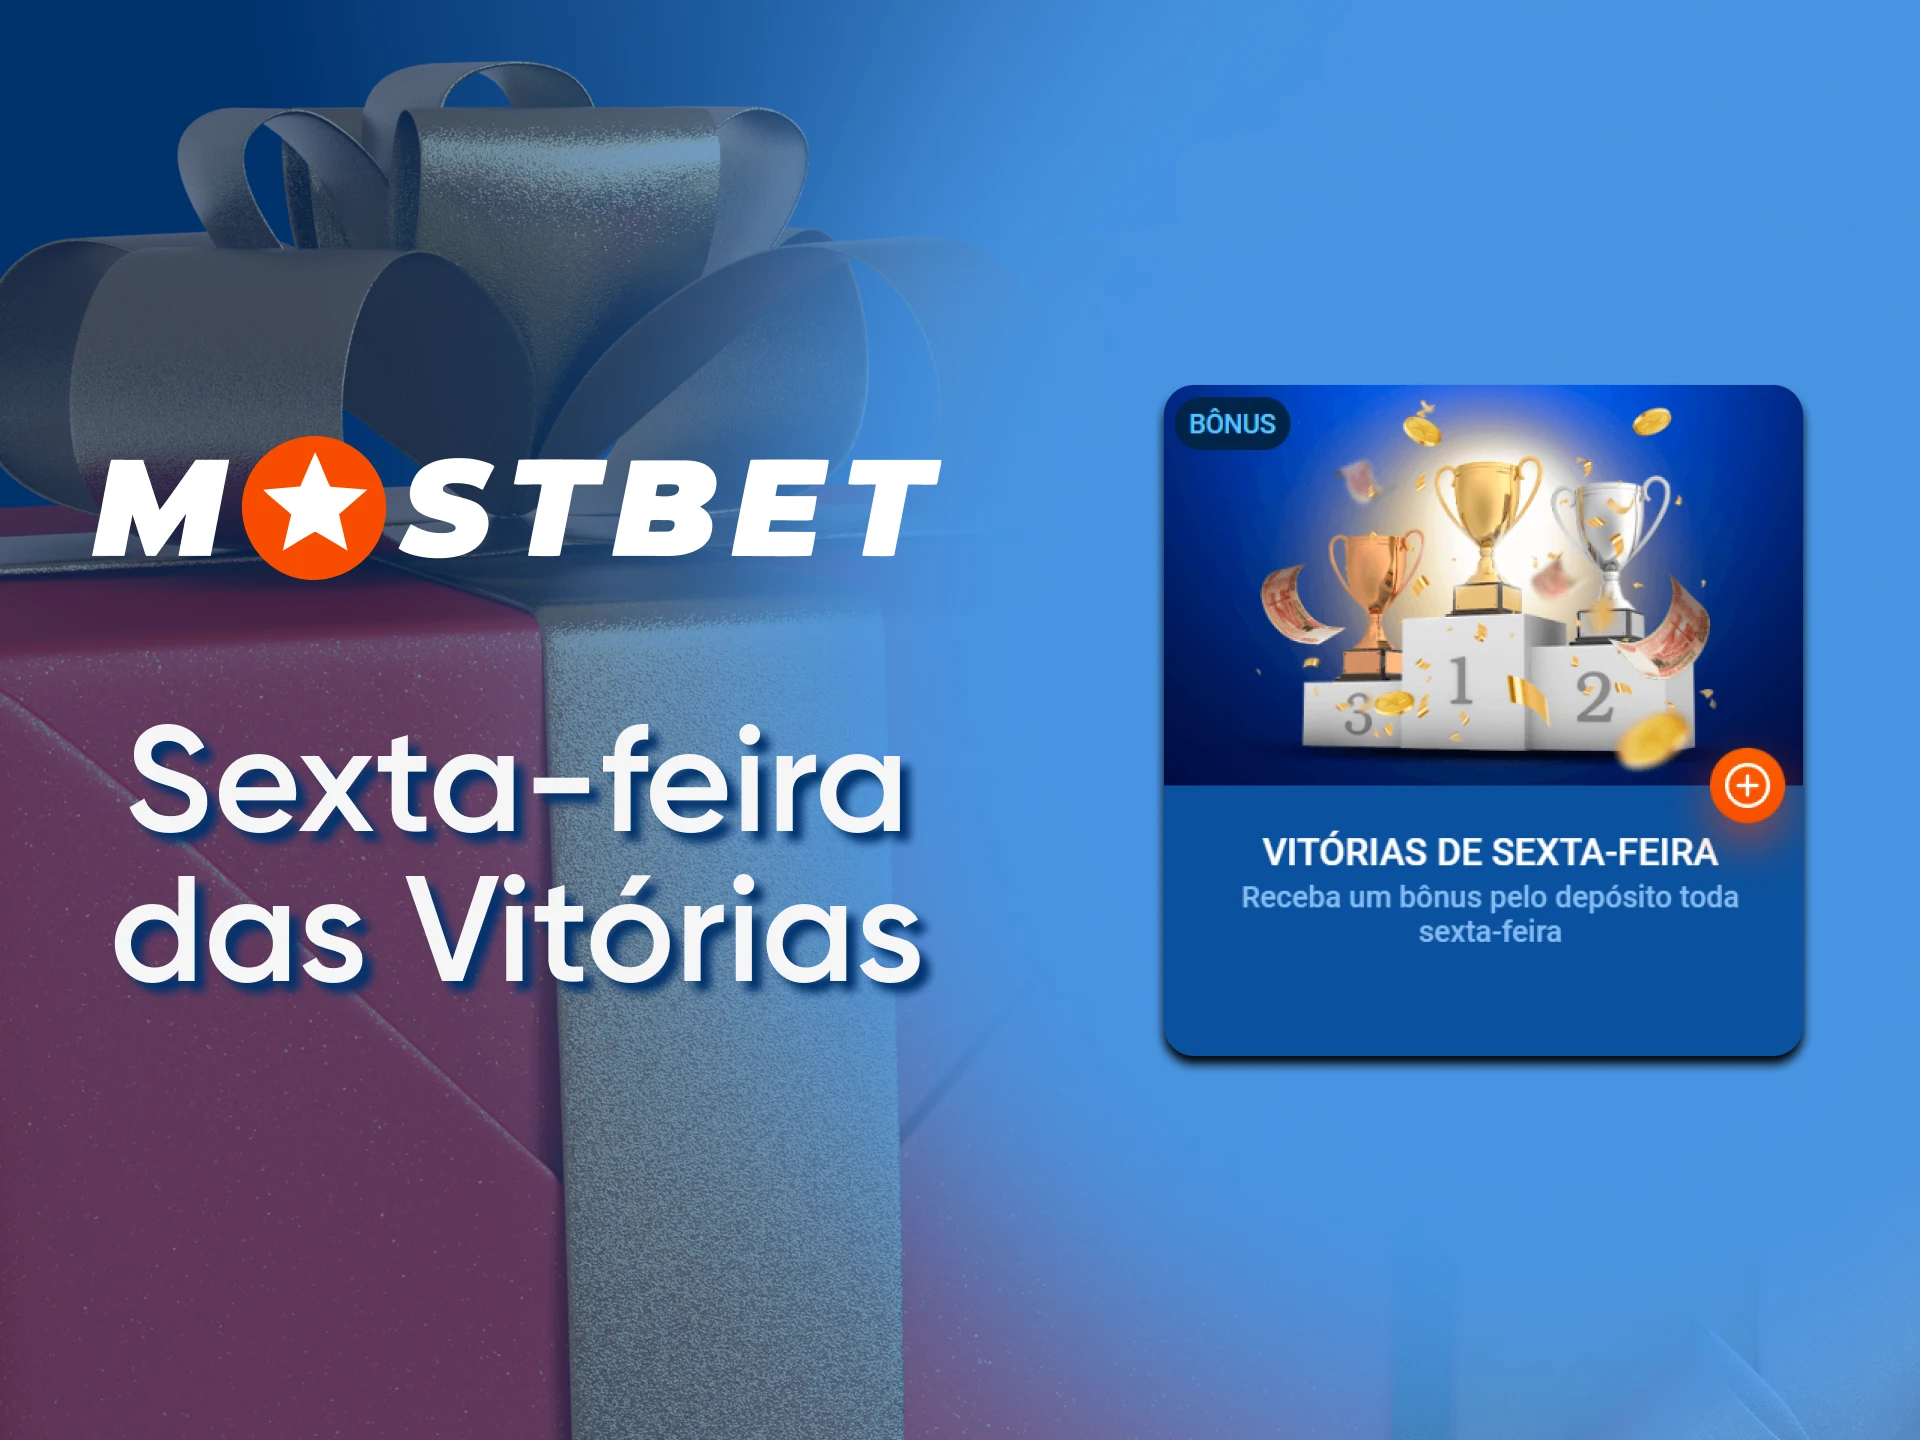 Get extra bonuses from Mostbet.